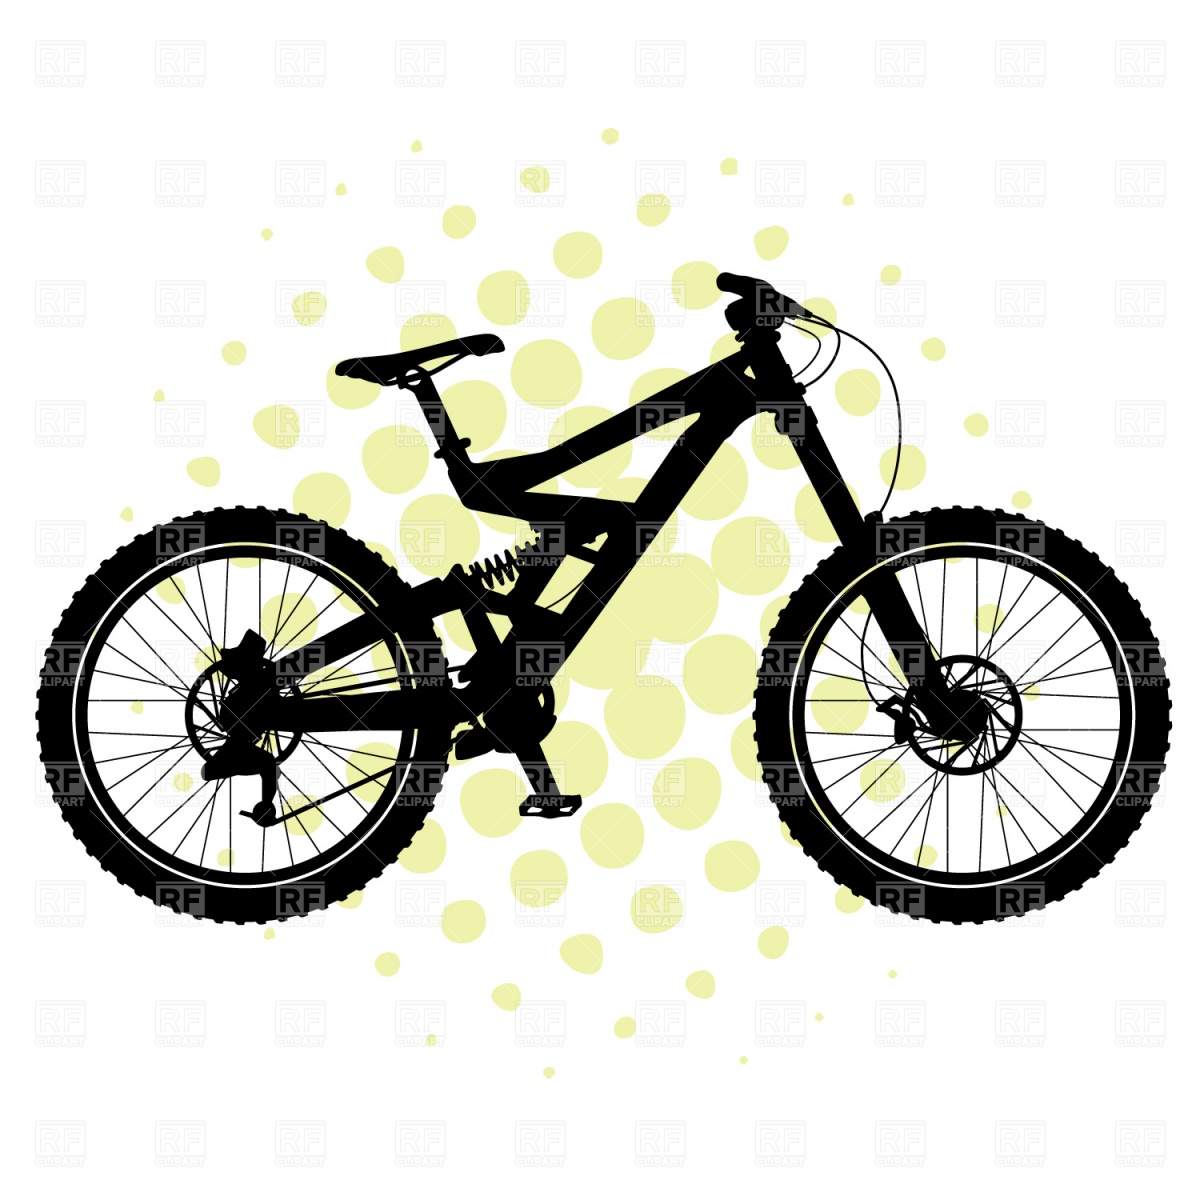 Bmx Bicycle Silhouette Download Royalty Free Vector Clipart  Eps